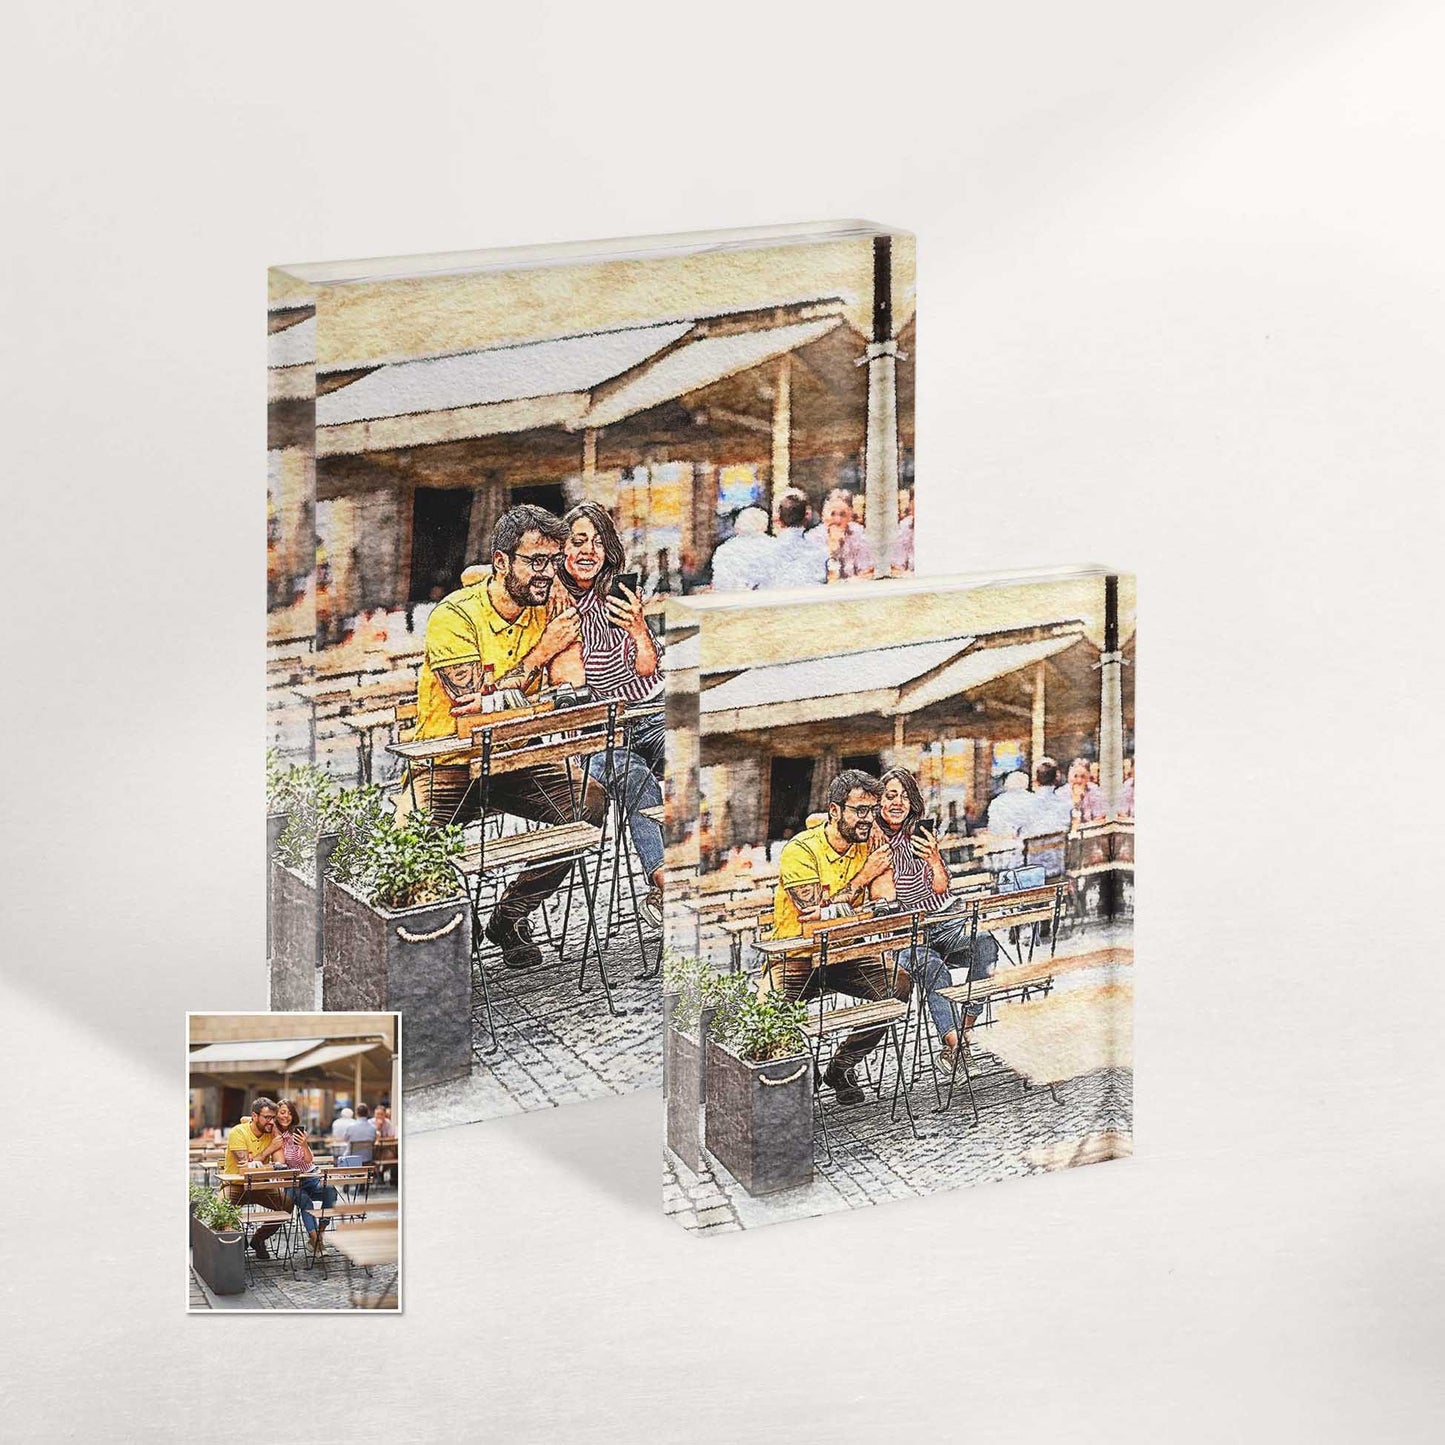 Be captivated by the striking beauty of our stunning acrylic block photos, expertly crafted to showcase personalized watercolor paintings that capture and immortalize your most precious moments